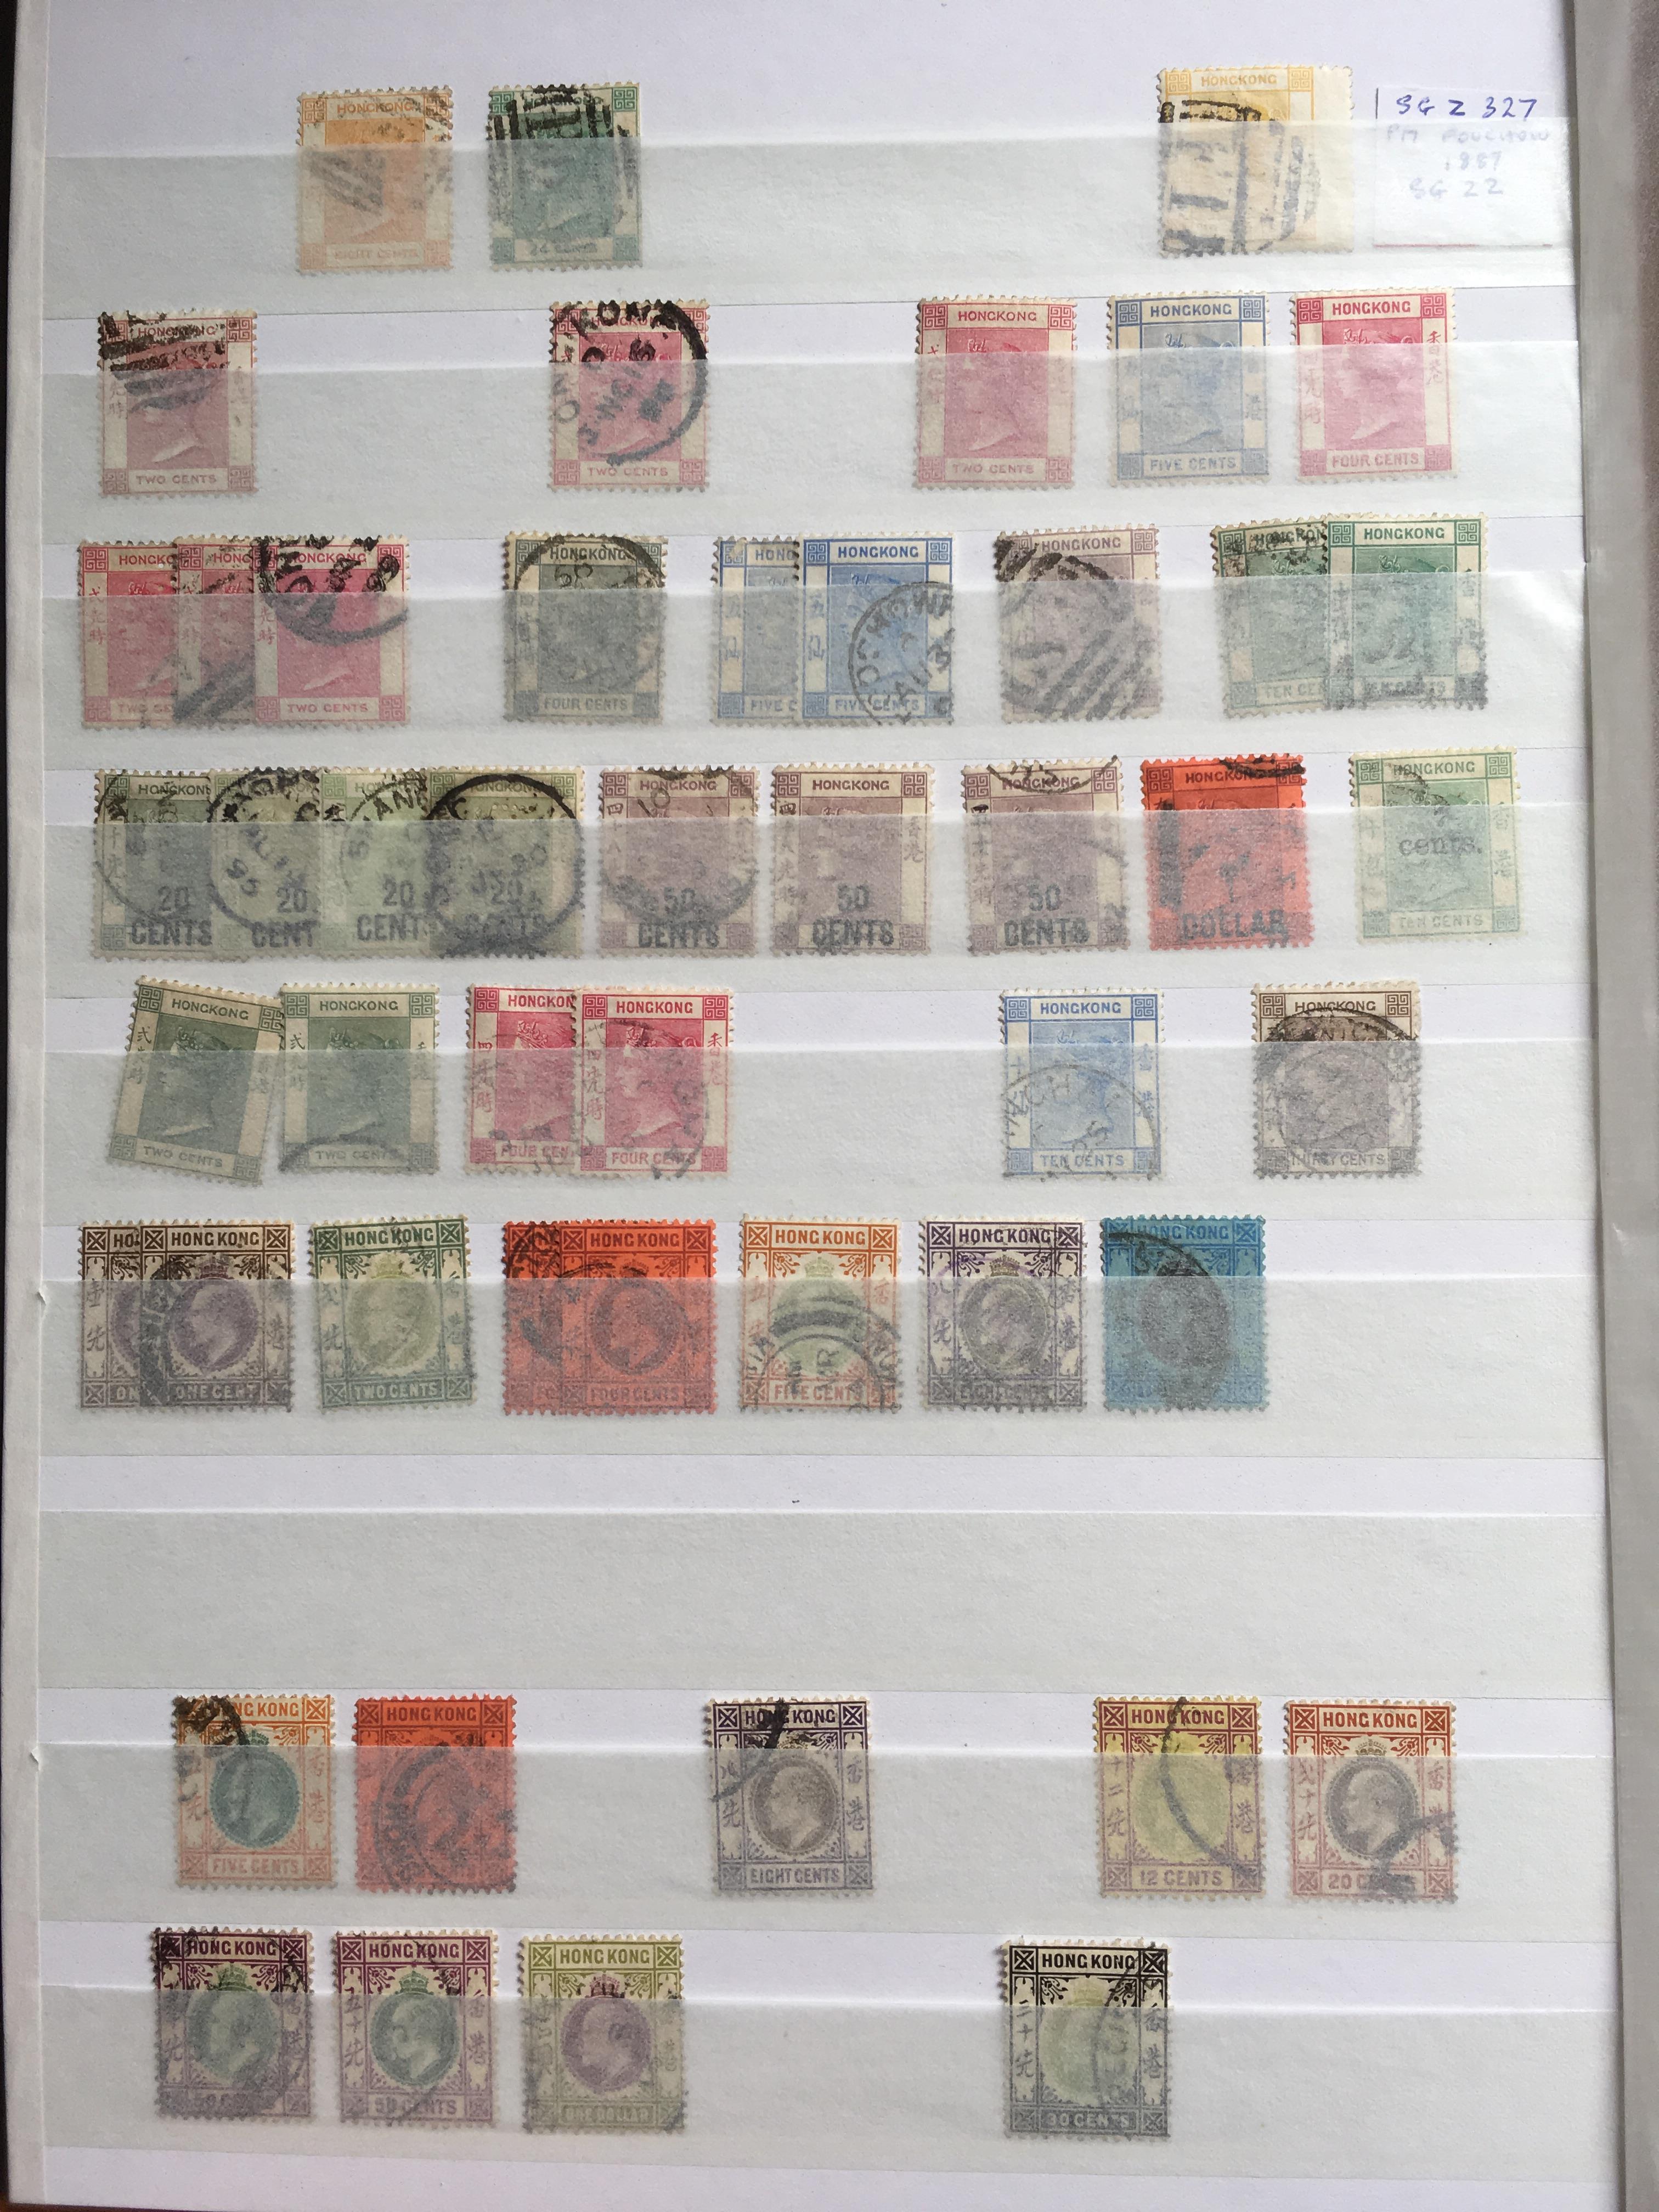 HONG KONG: 1862-1980 MAINLY USED WITH 1862-3 NO WMK VALUES TO 48c, 1863-71 CROWN CC 18c, - Image 11 of 18